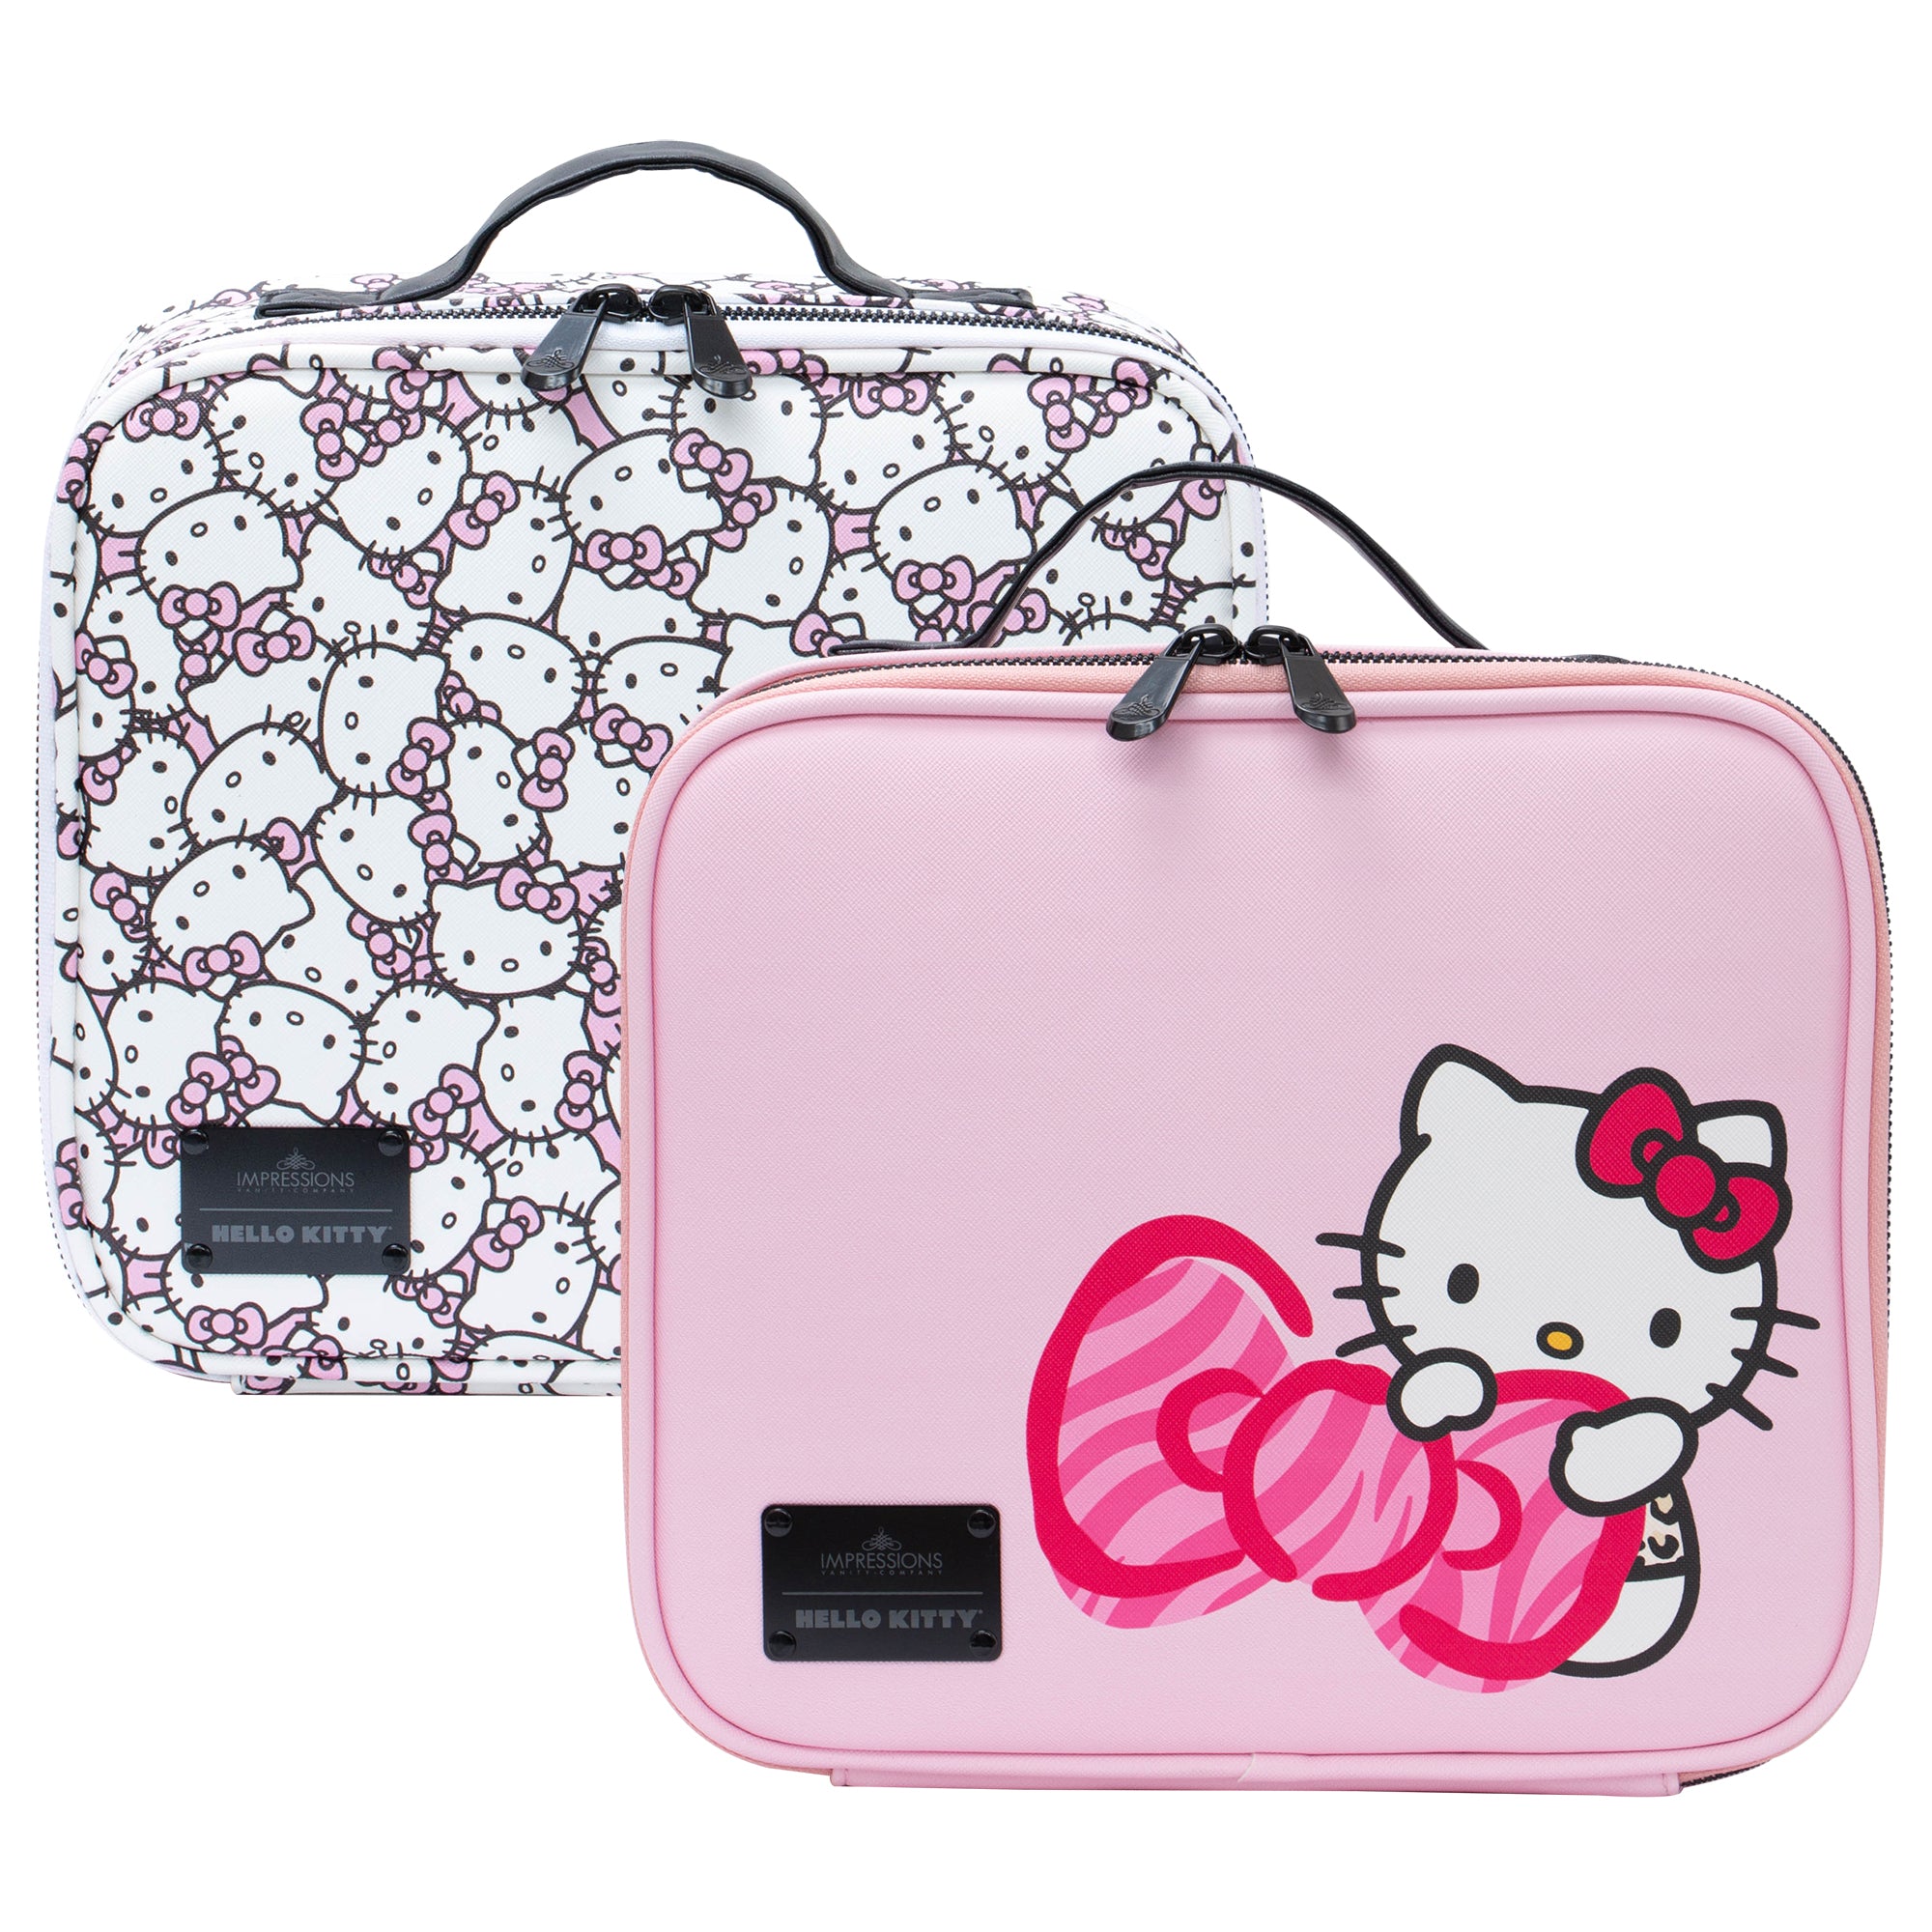 Impressions Vanity Hello Kitty Makeup Case with Full Size Mirror and Lighting, Makeup Organizer with Touch Sensor, Travel Jewelry Case with Makeup